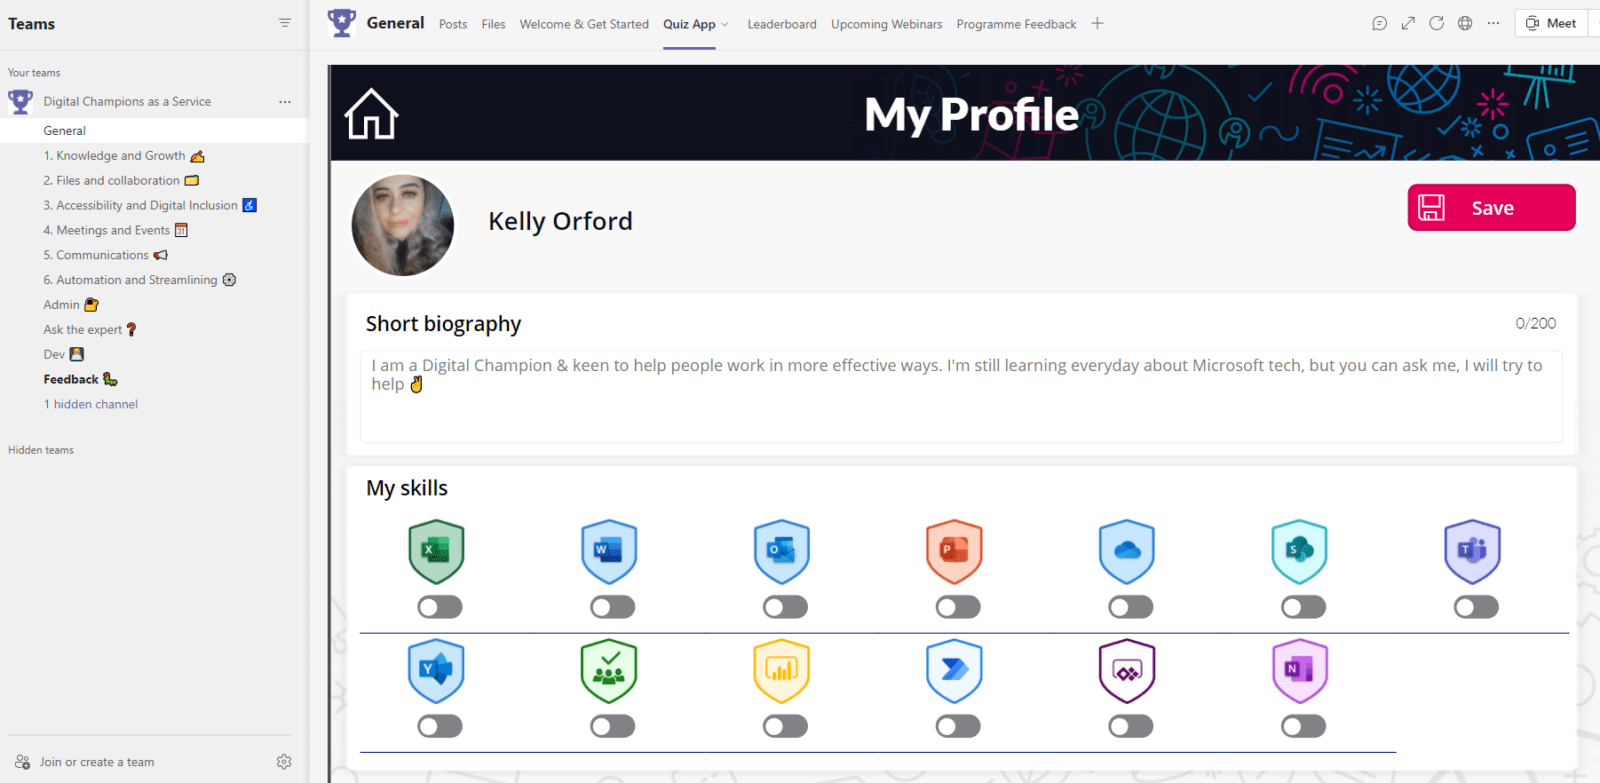 Digital Champion My profile section with skill badges